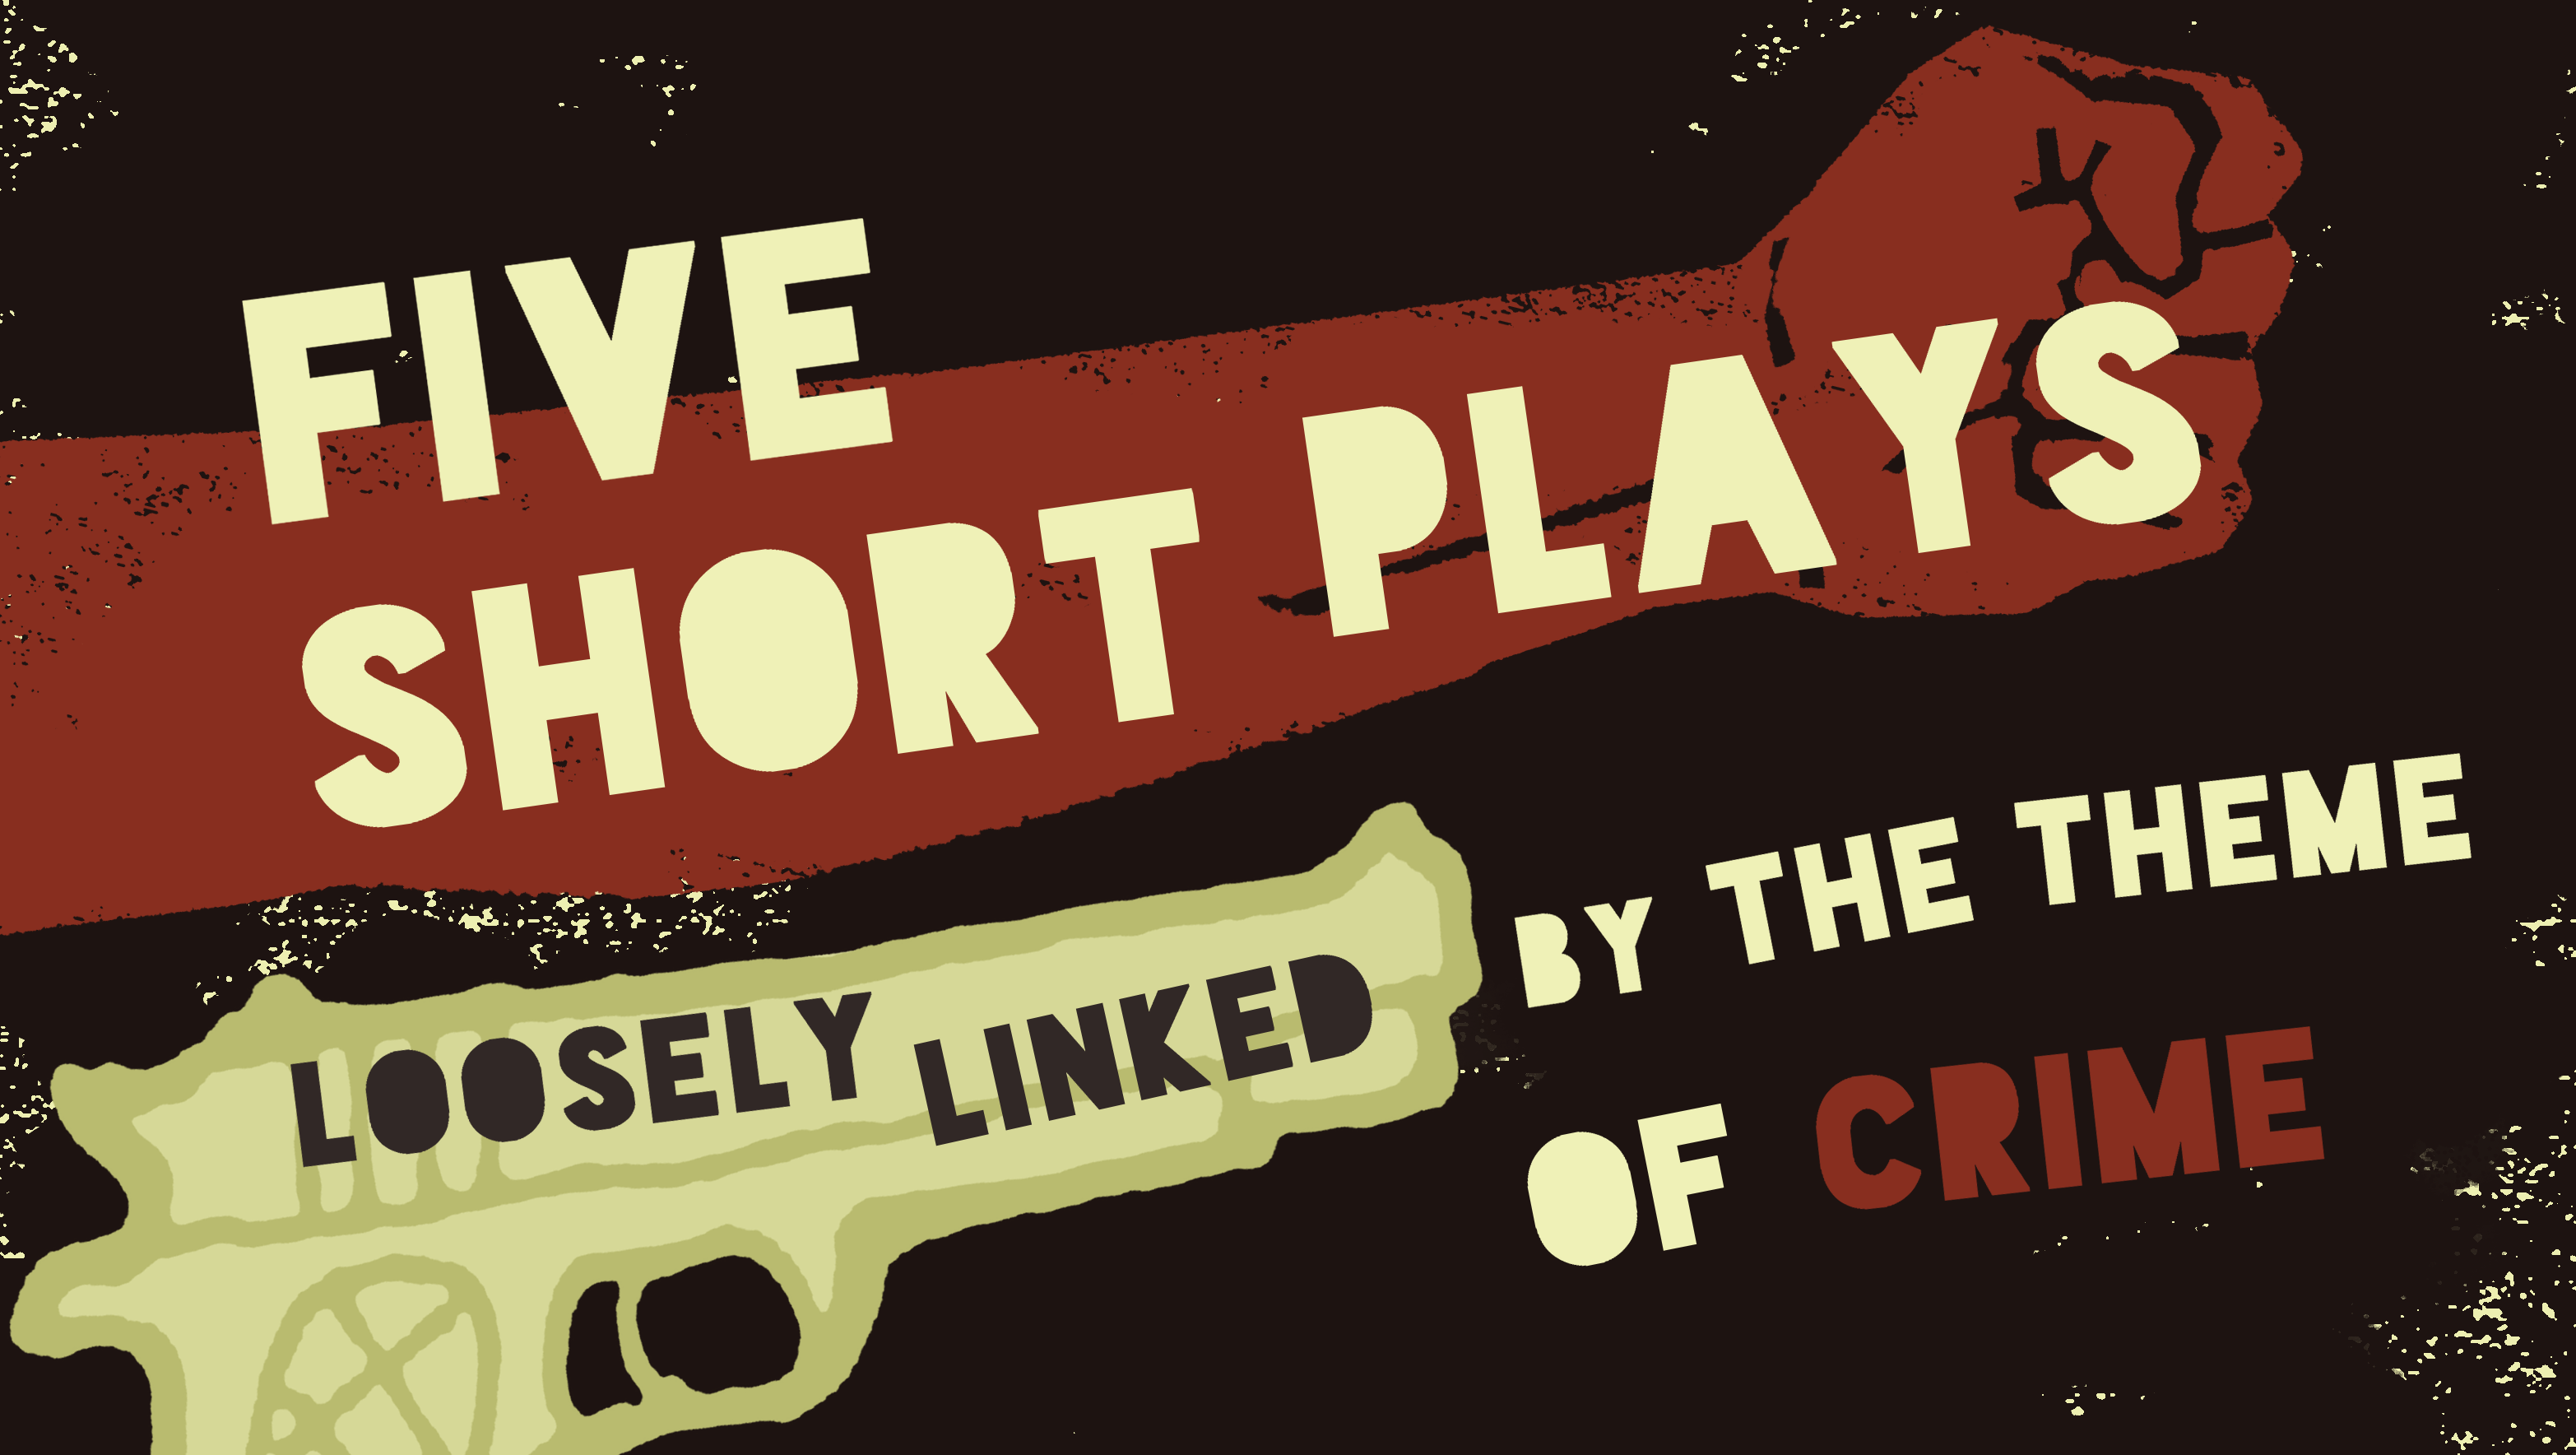 Five Short Plays Loosely Linked By The Theme Of Crime